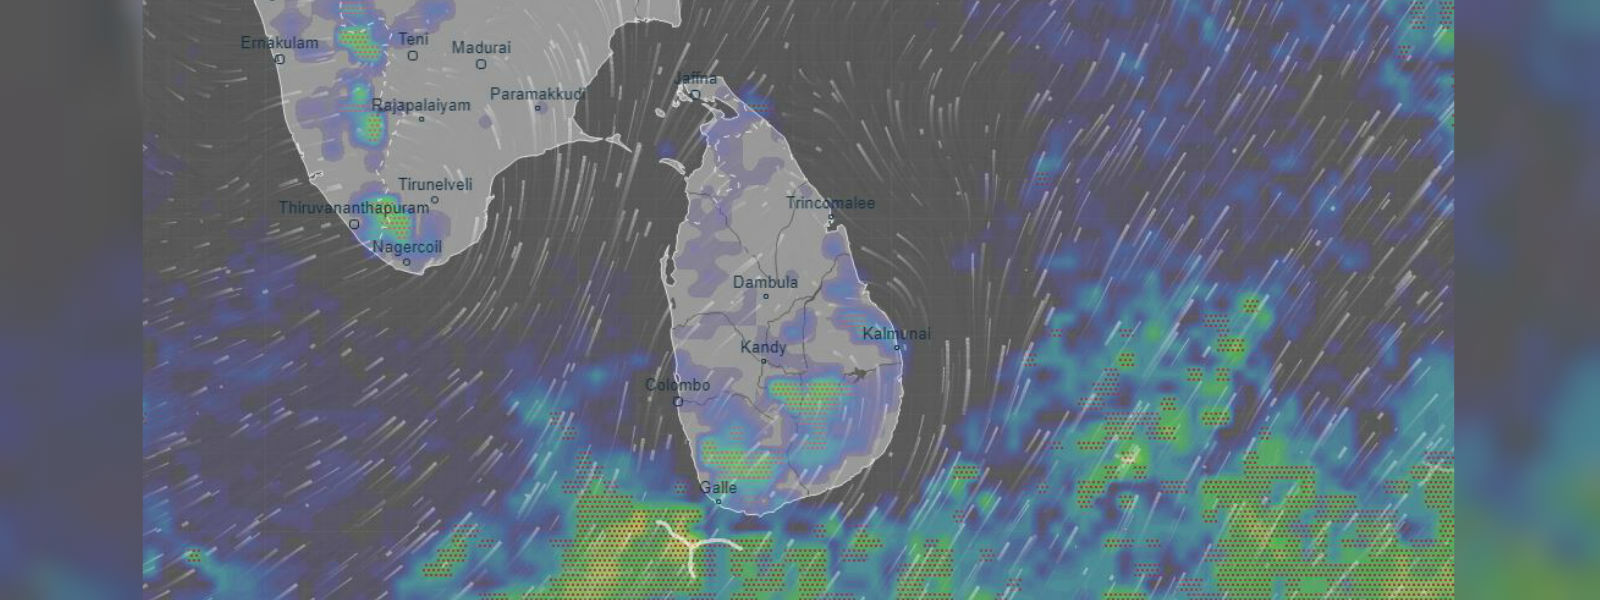 Light showers expected over the country